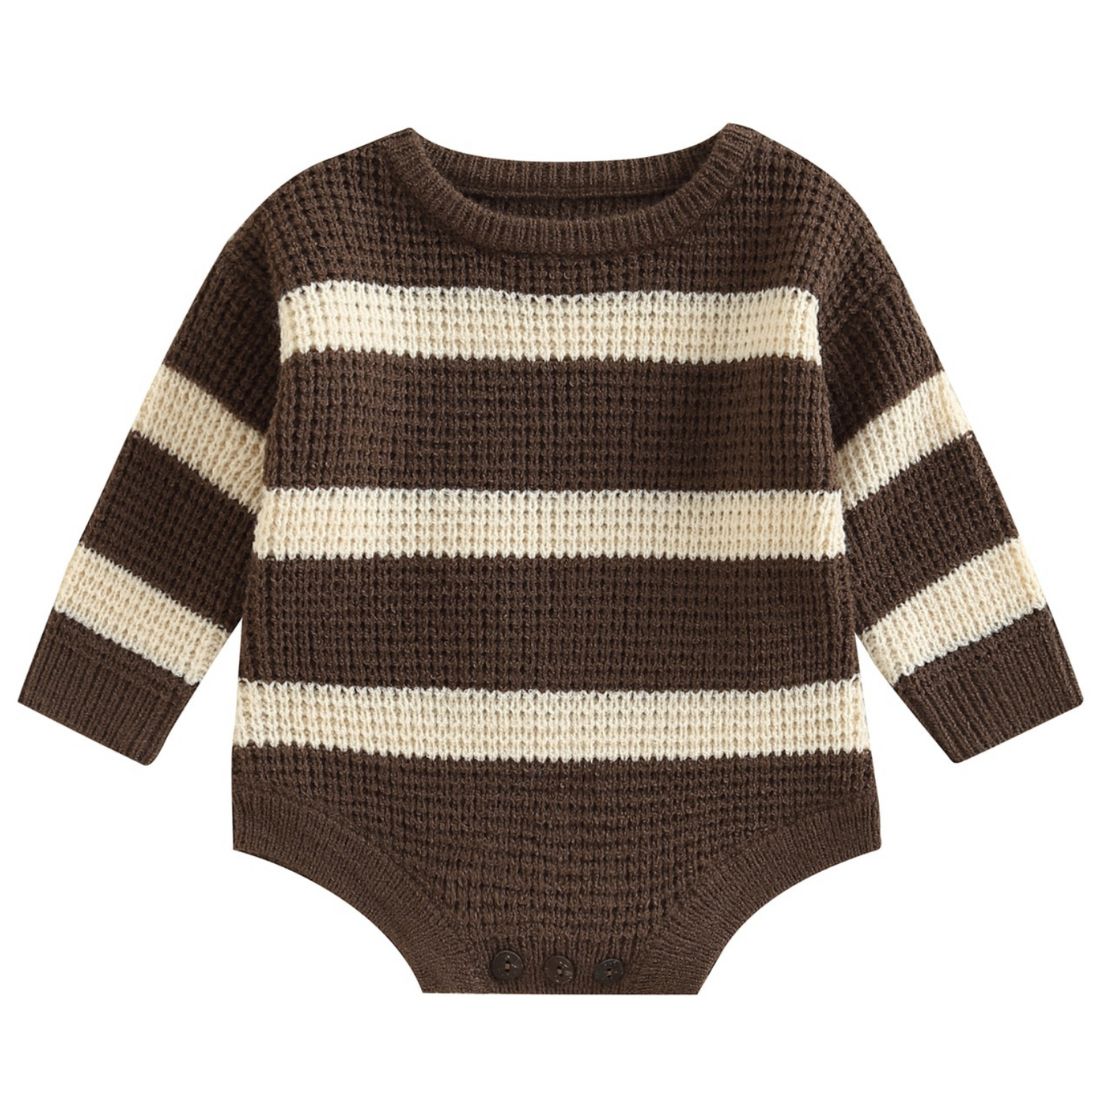 Unisex Long Sleeve Blue Striped Cable Knit Bodysuit - My Trendy Youngsters | Buy on-trend and stylish Baby and Toddler Onesies and bodysuits @ My Trendy Youngsters - Dress your little one in Style @ My Trendy Youngsters